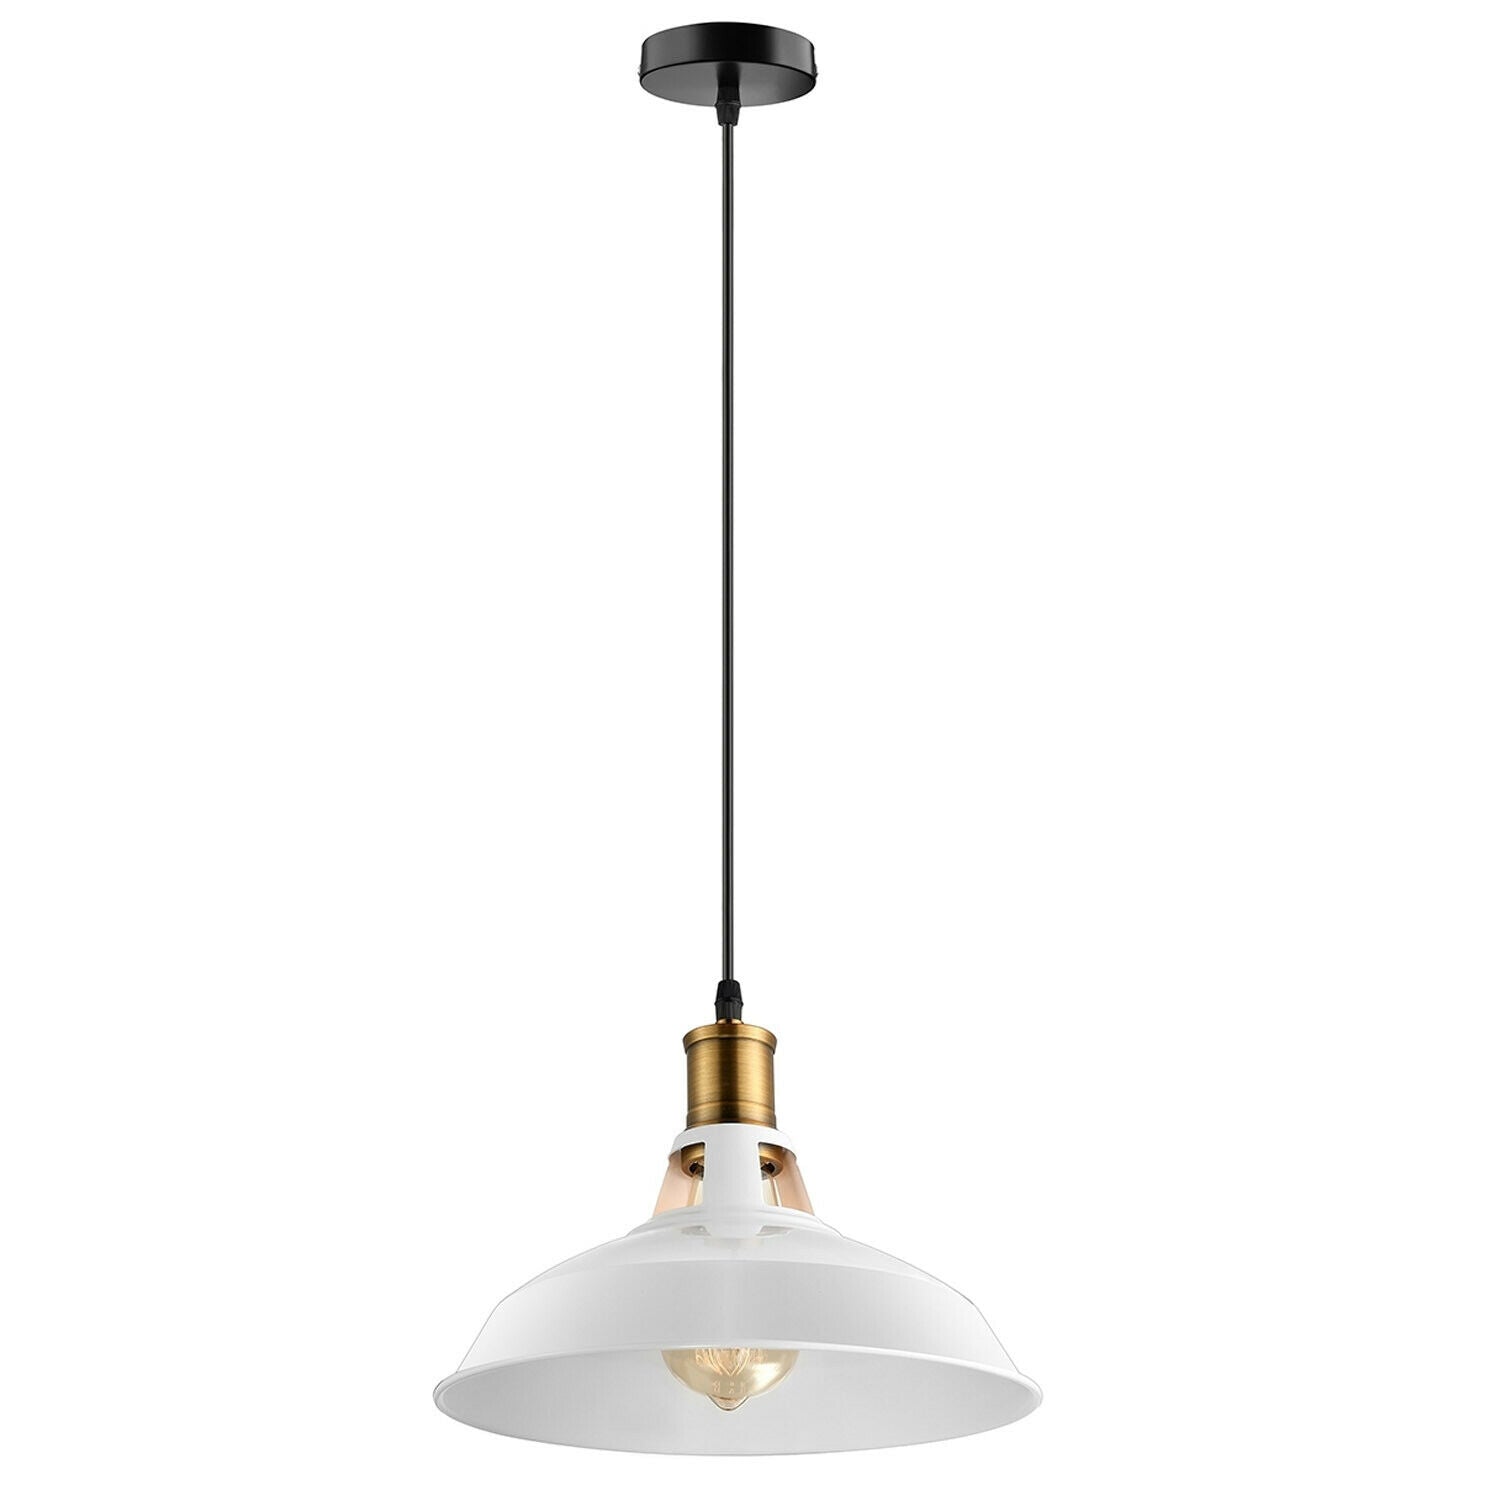 White and gold pendant light fixture